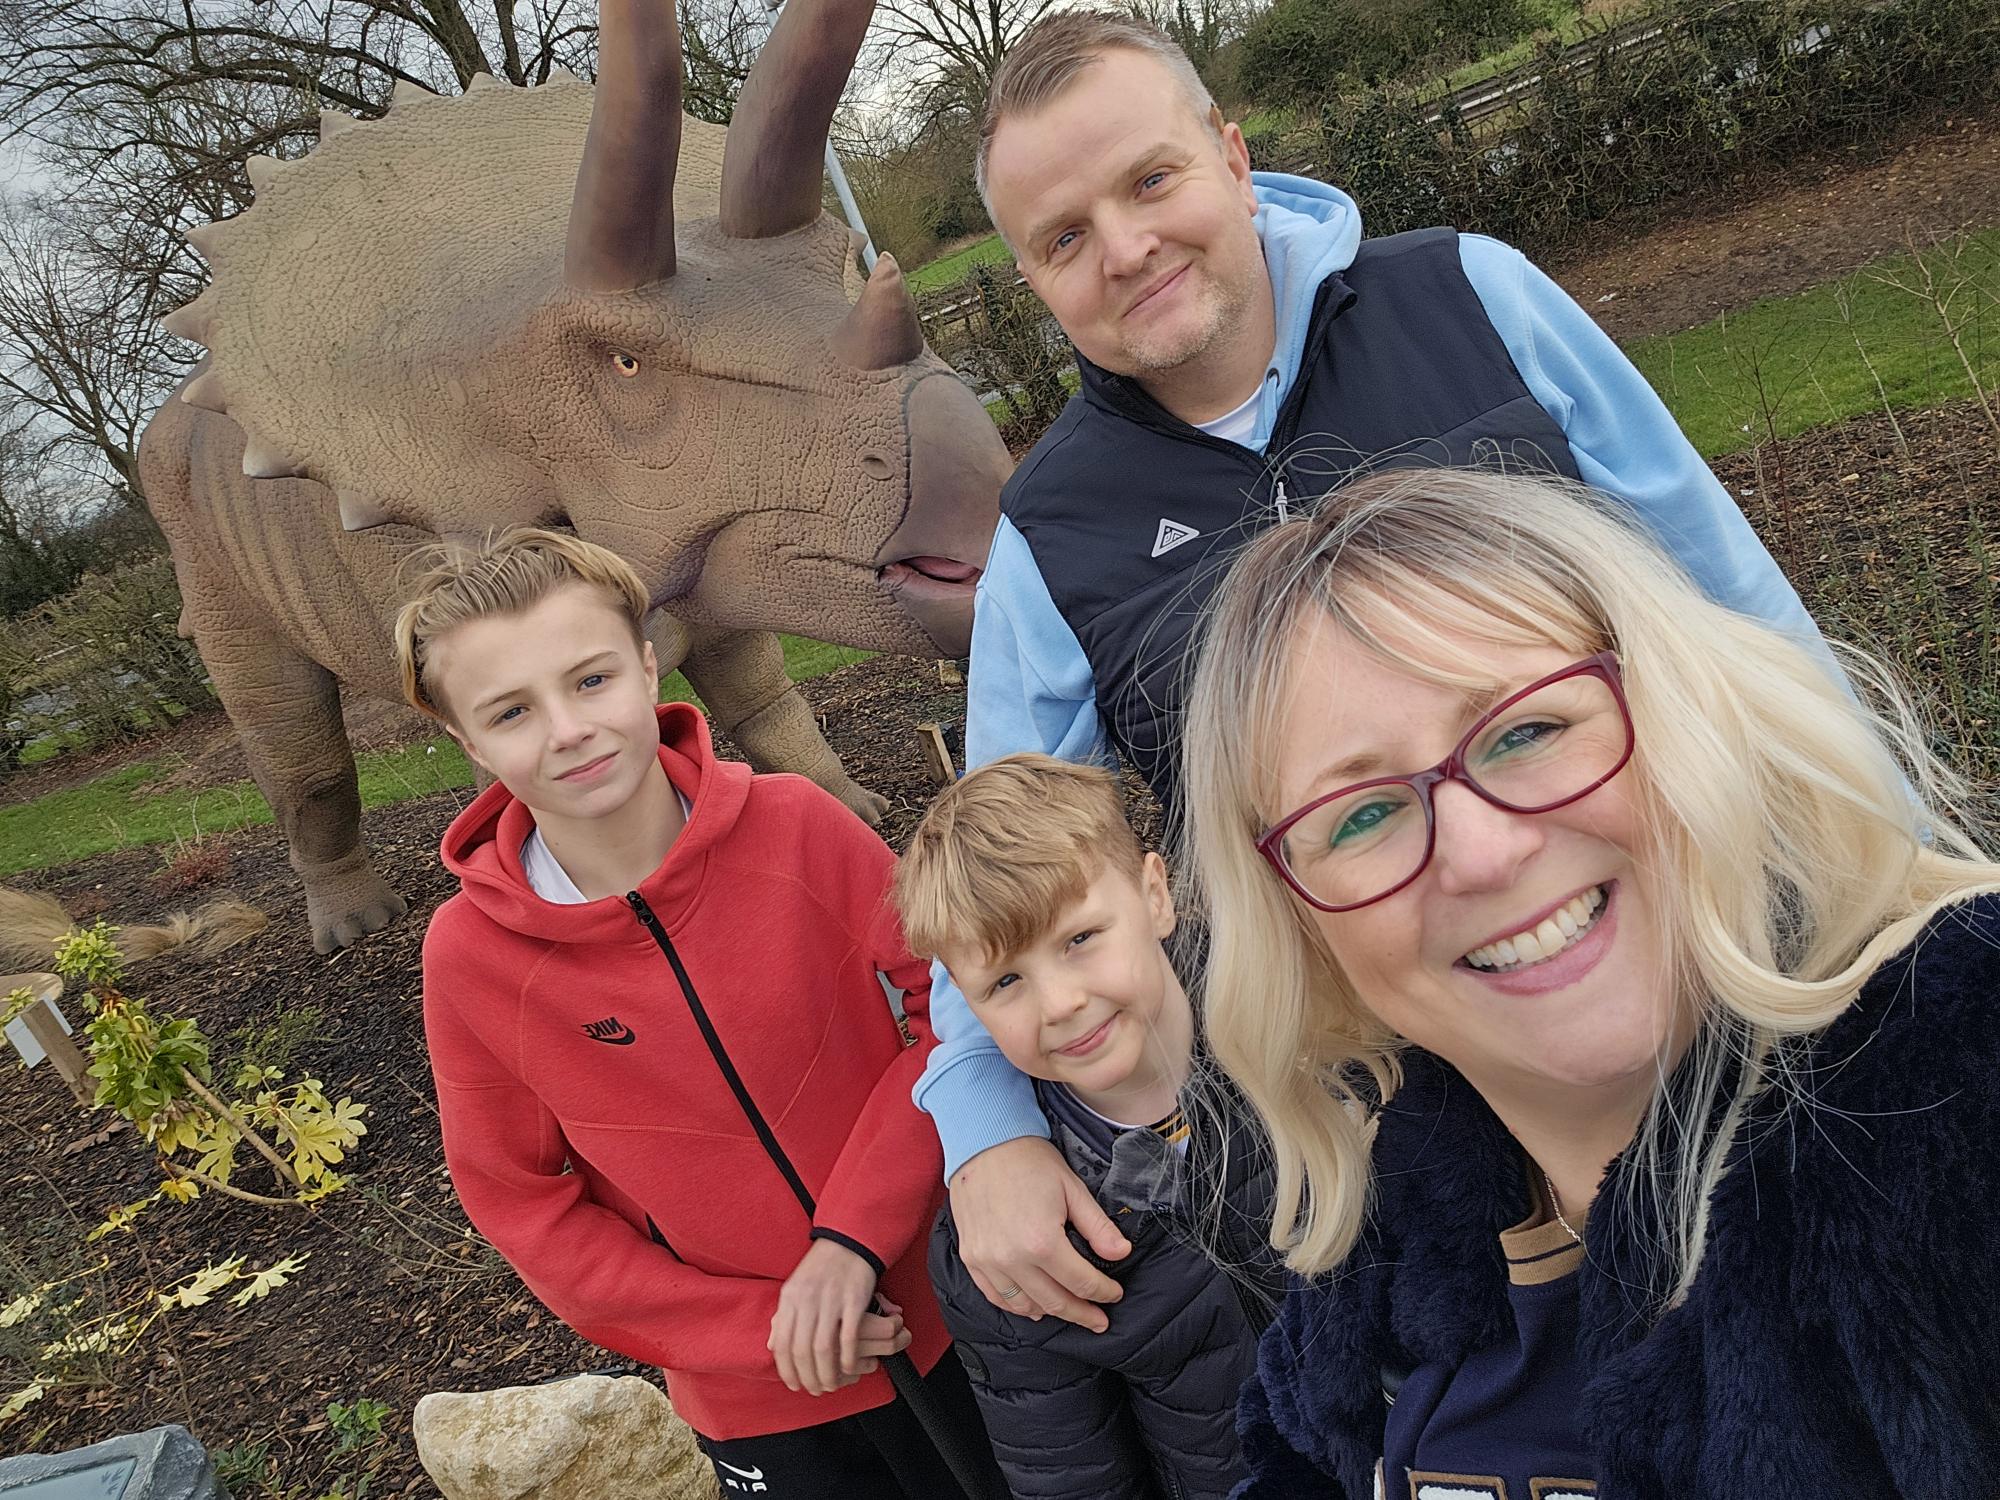 Two sons and their parents smile stood next to a dinosaur statue